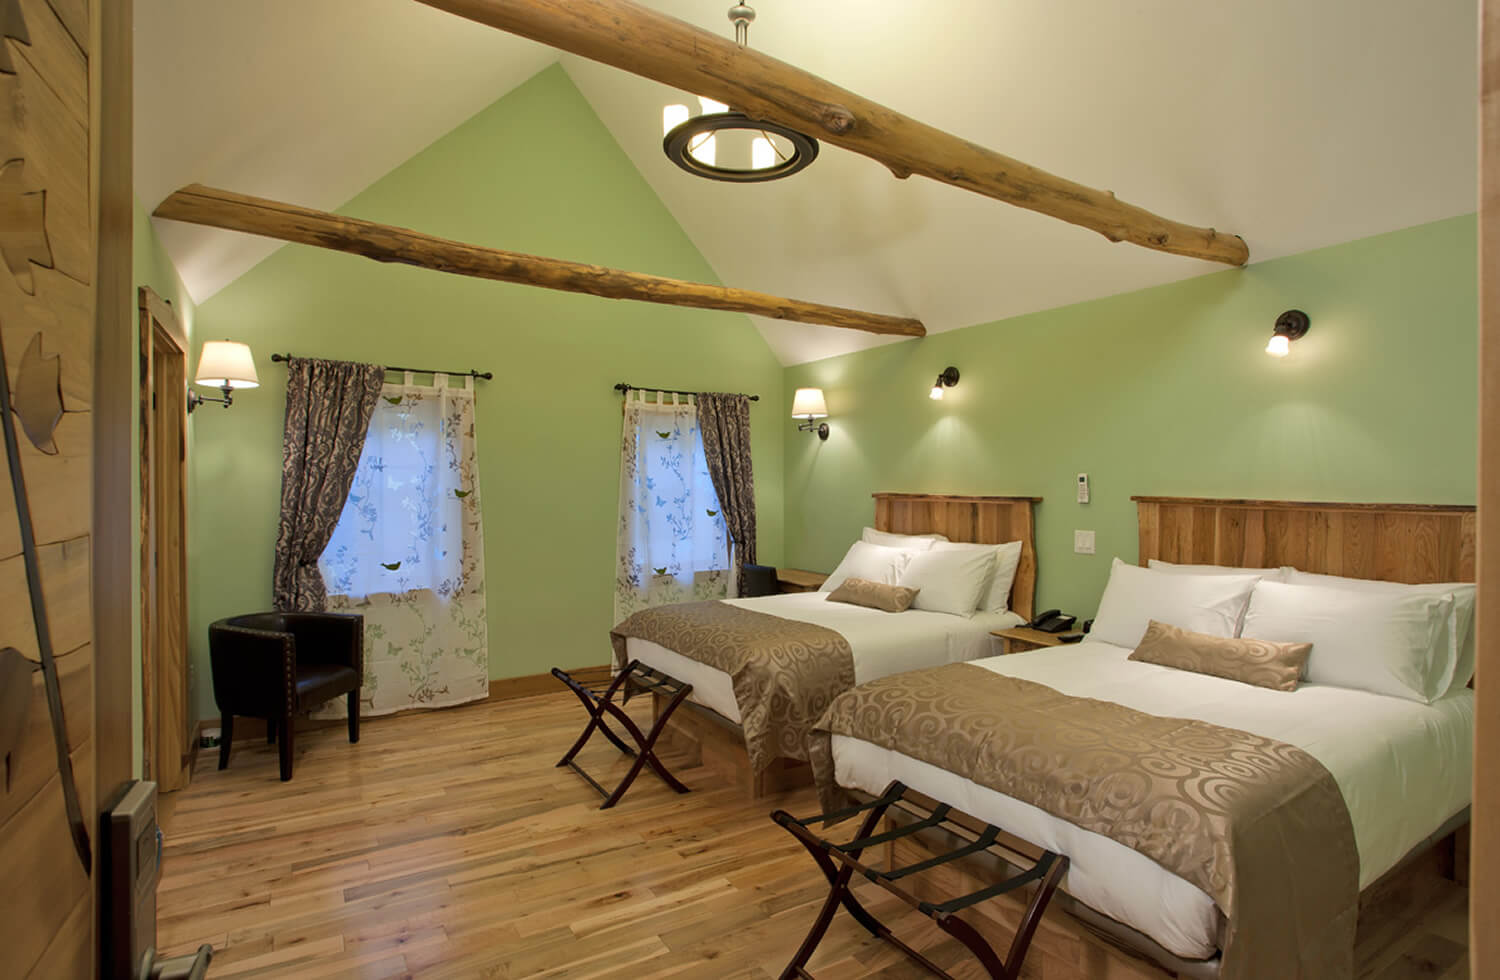 A natural green room with tan accents has two white beds with tan throw blankets